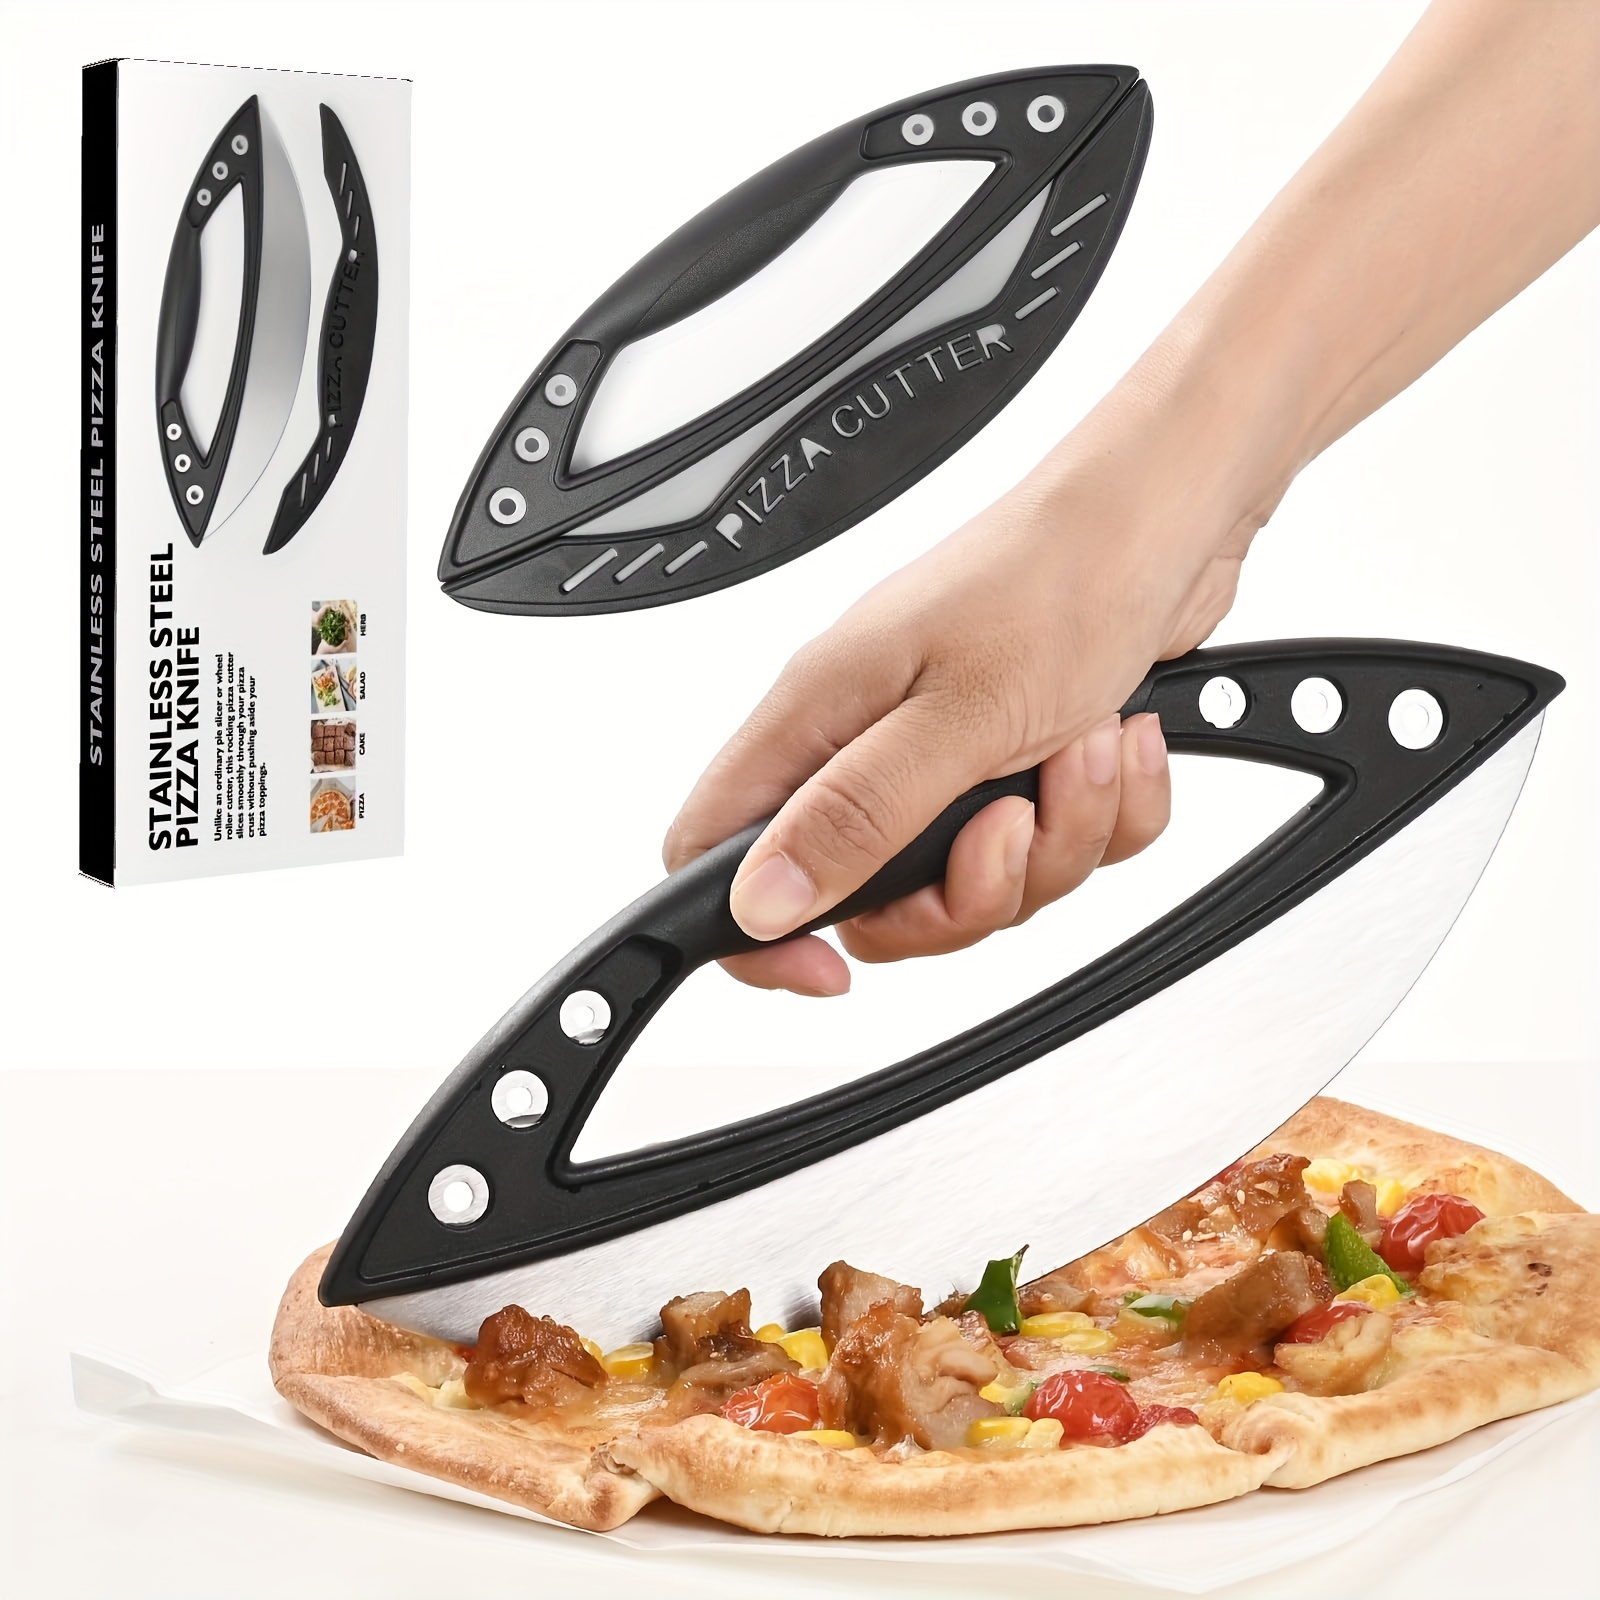 

Pizza Cutter Rocker Blade 12 Inch, Pizza Slicer, With Ease-ideal For Pizza Sauce, Bread, , And Pizza